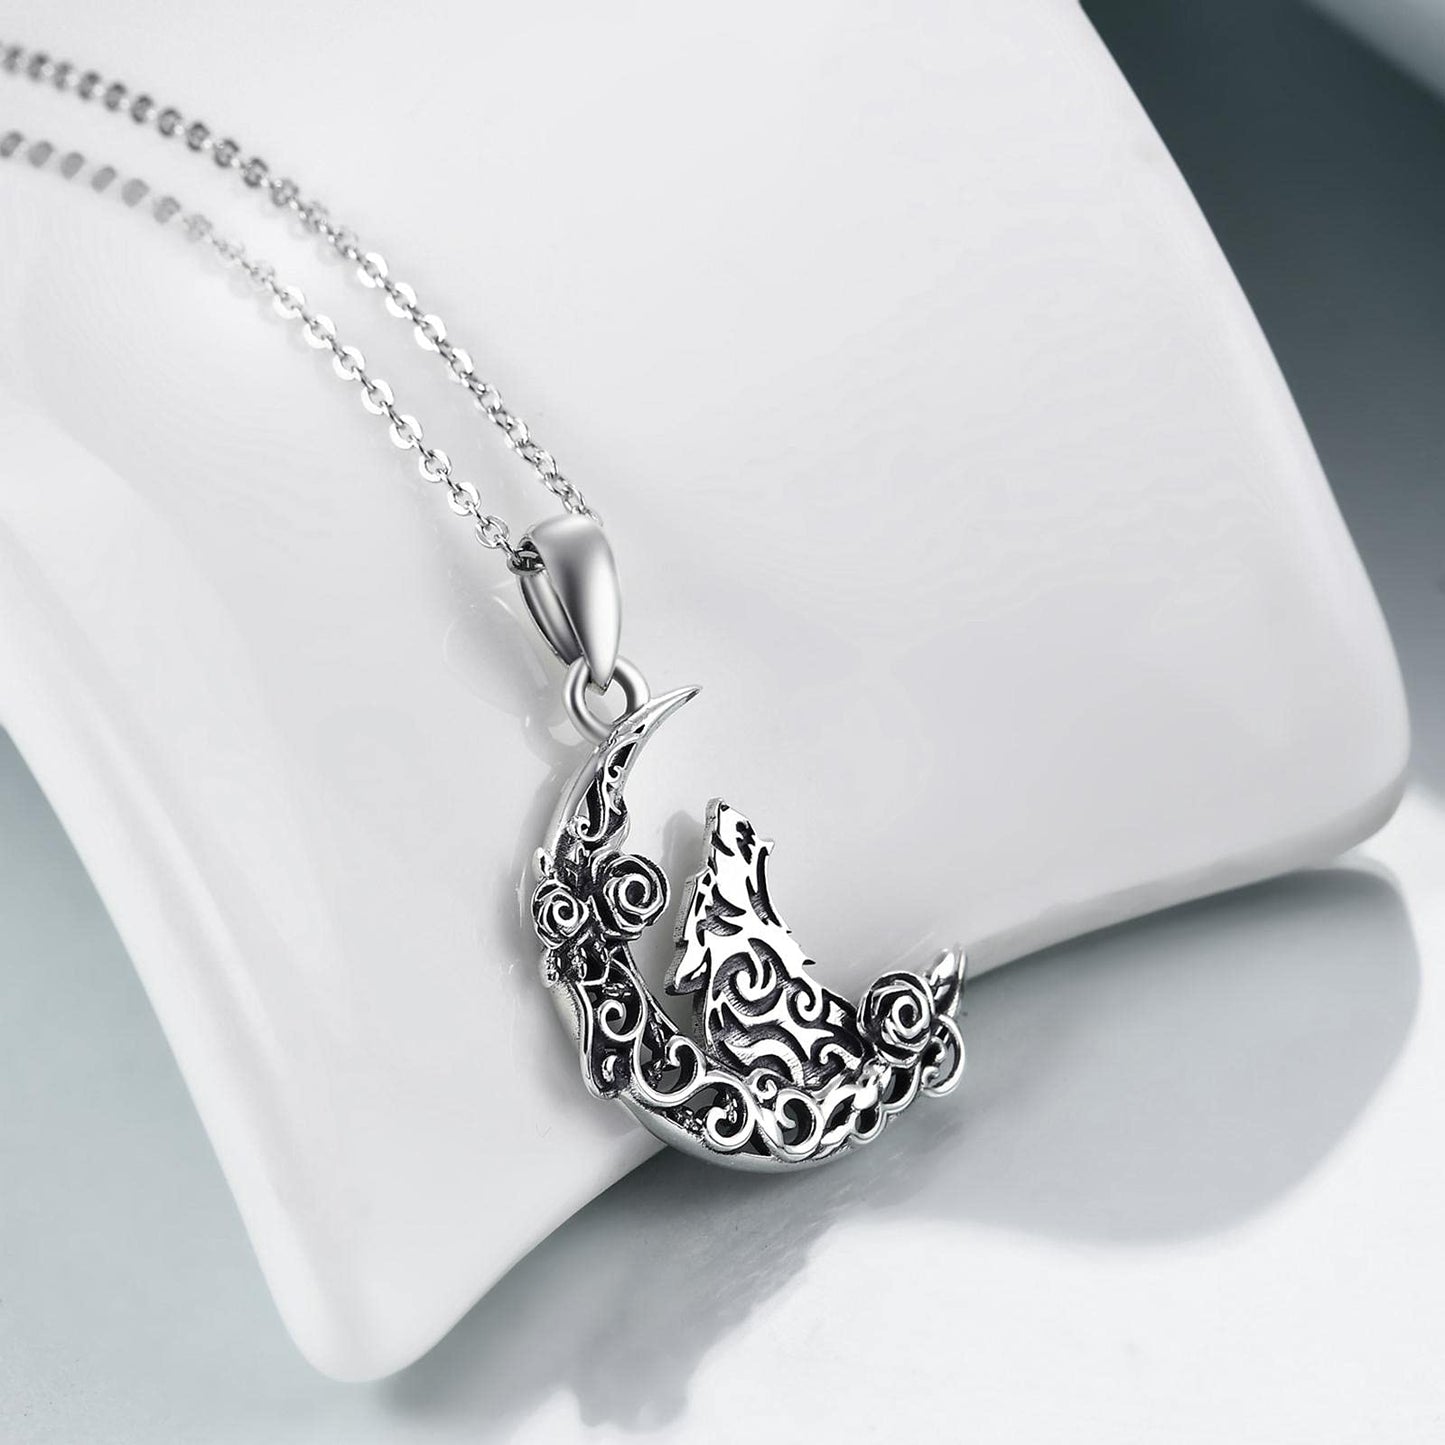 Celtic Knot Sterling Silver Animal Pendant Necklace - Raven/Wolf/Dog/Hummingbird/Dragon - Irish Lucky Jewelry Gift for Women and Girls.